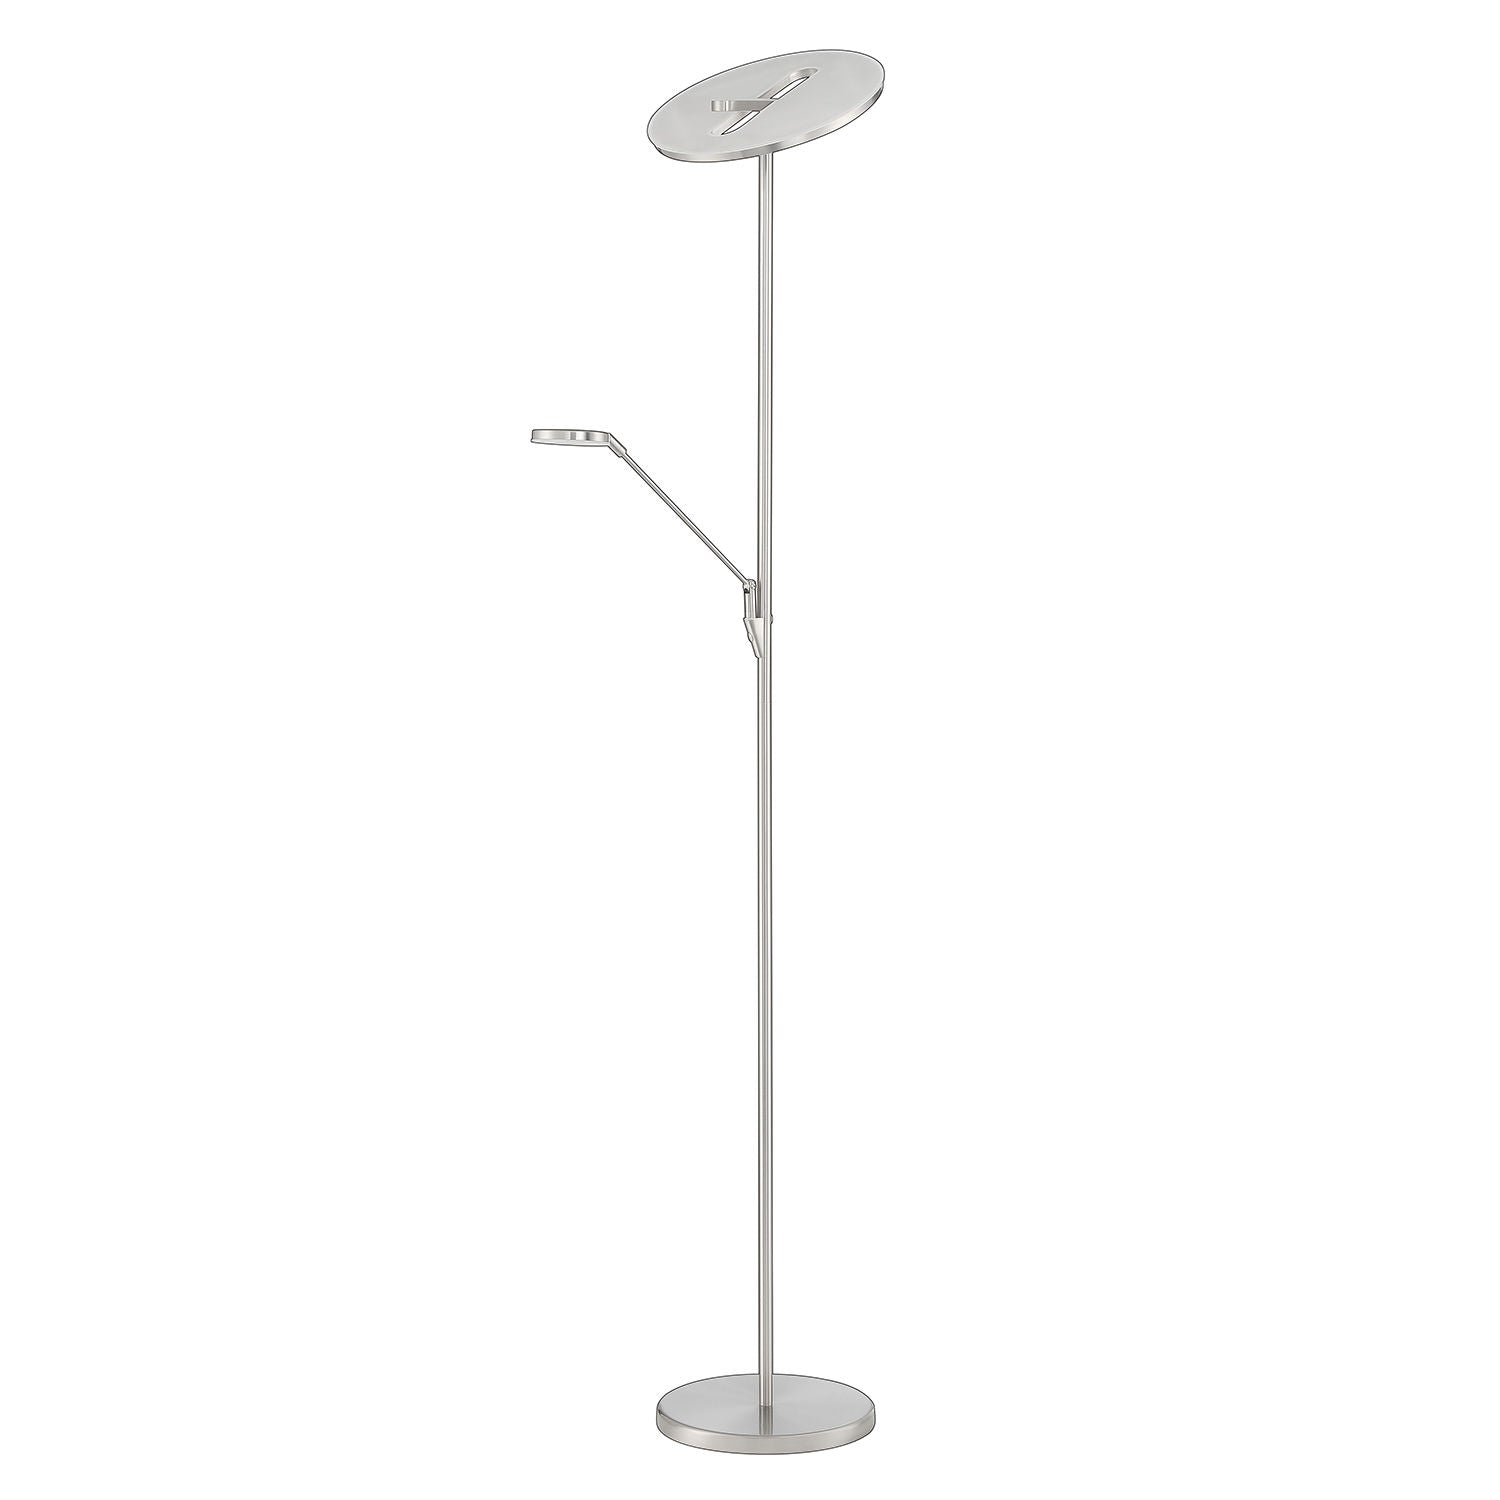 Floor lamp Stainless steel INTEGRATED LED - TC5013-SN | KENDAL